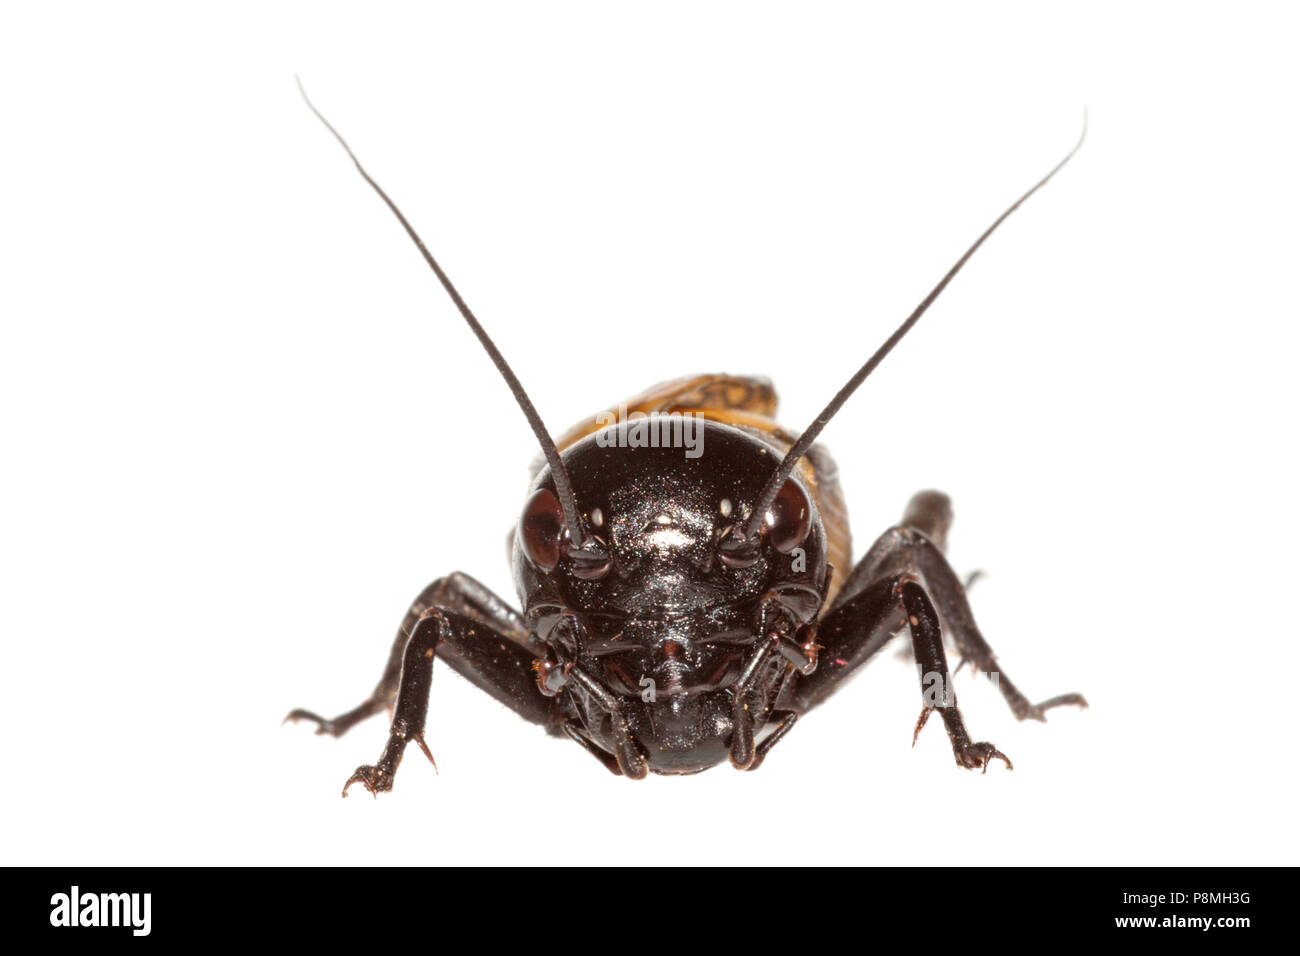 field cricket isolated against a white background Stock Photo